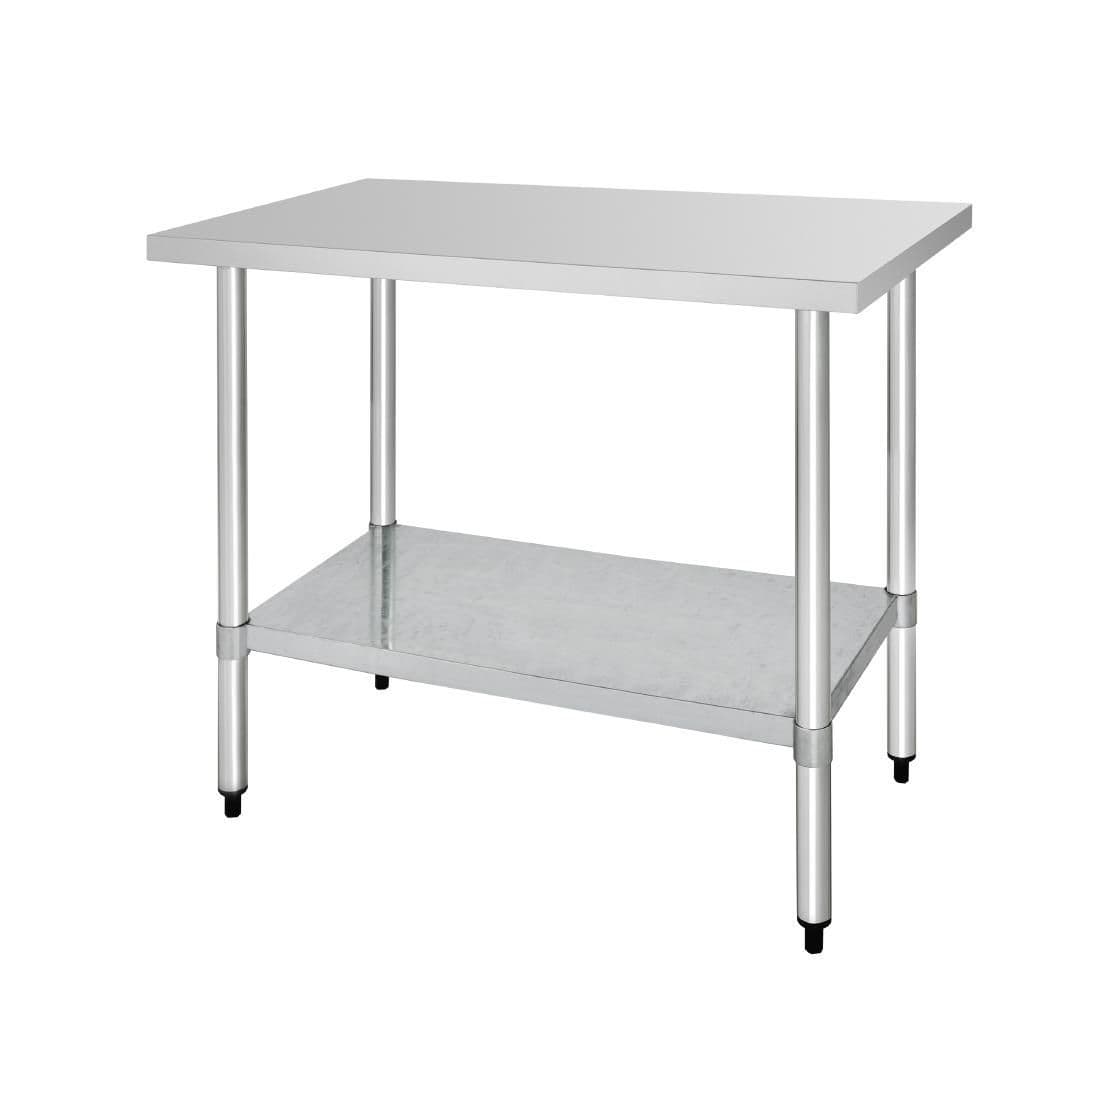 Vogue Stainless Steel Prep Table 1200mm